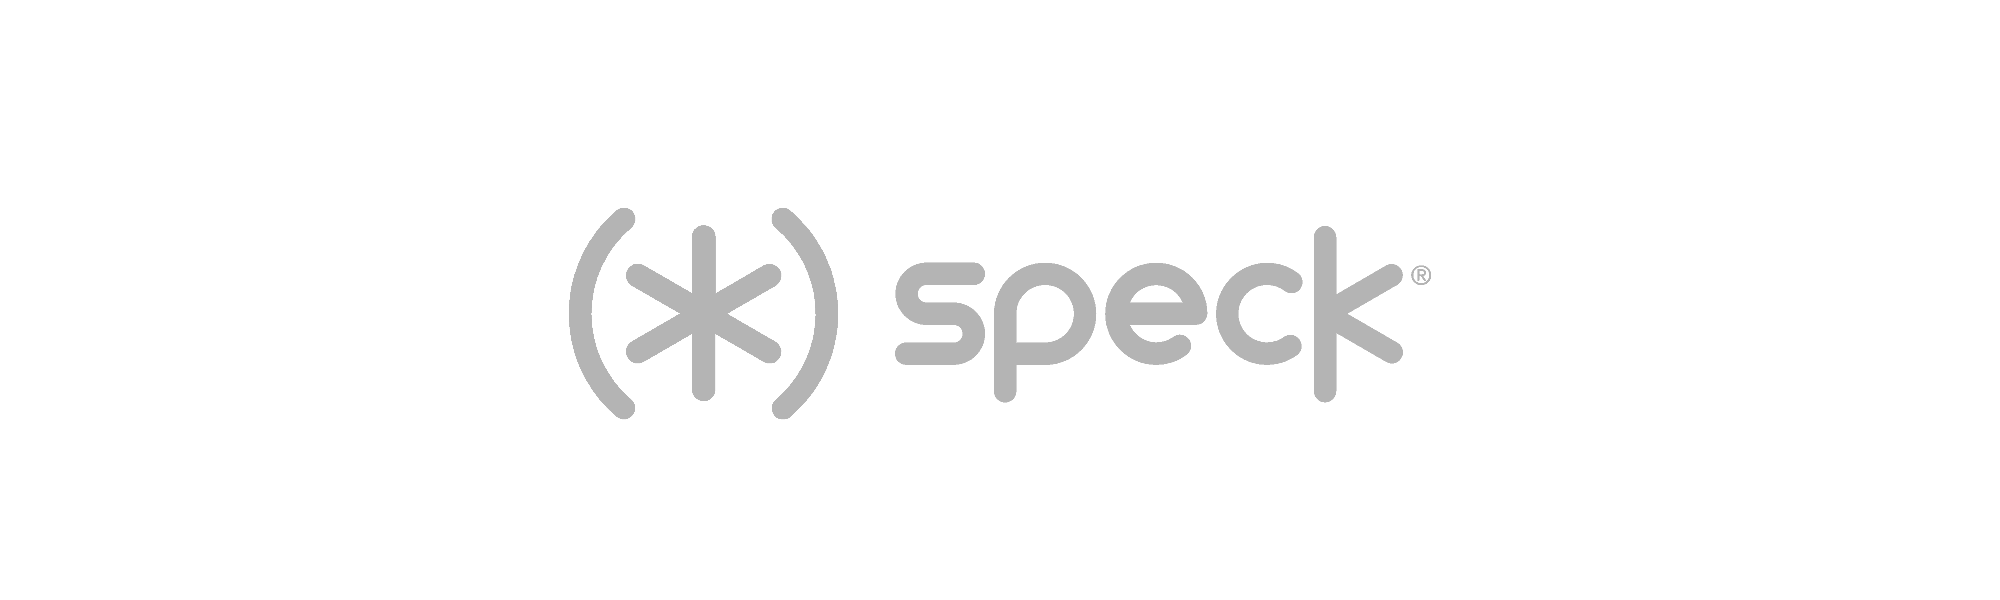 speck.png